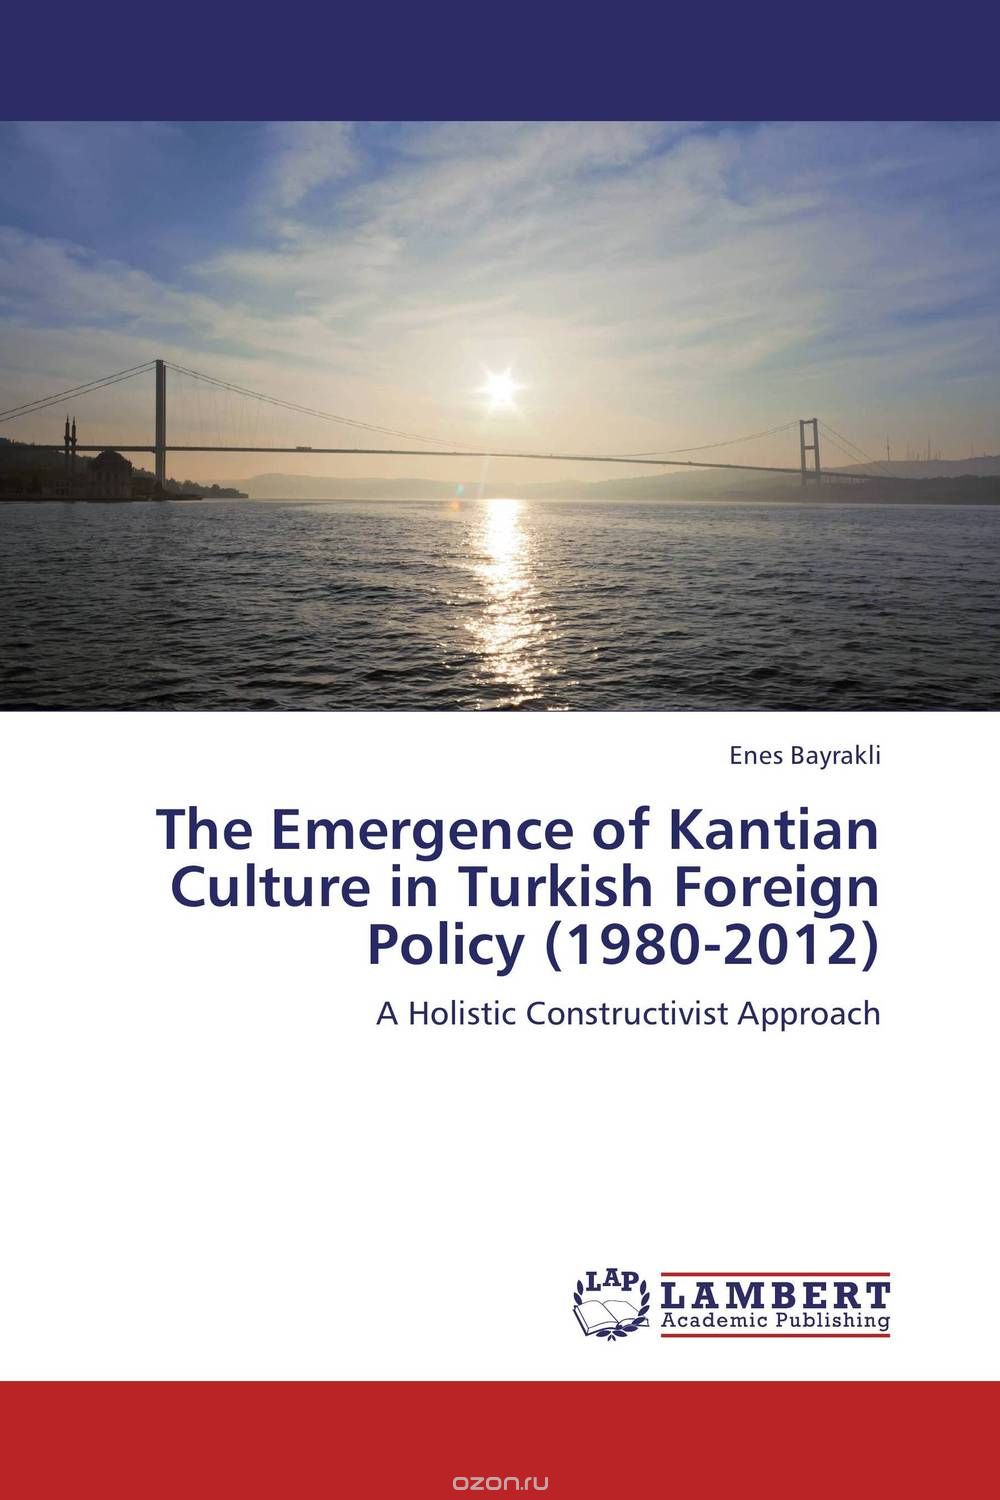 Скачать книгу "The Emergence of Kantian Culture in Turkish Foreign Policy (1980-2012)"